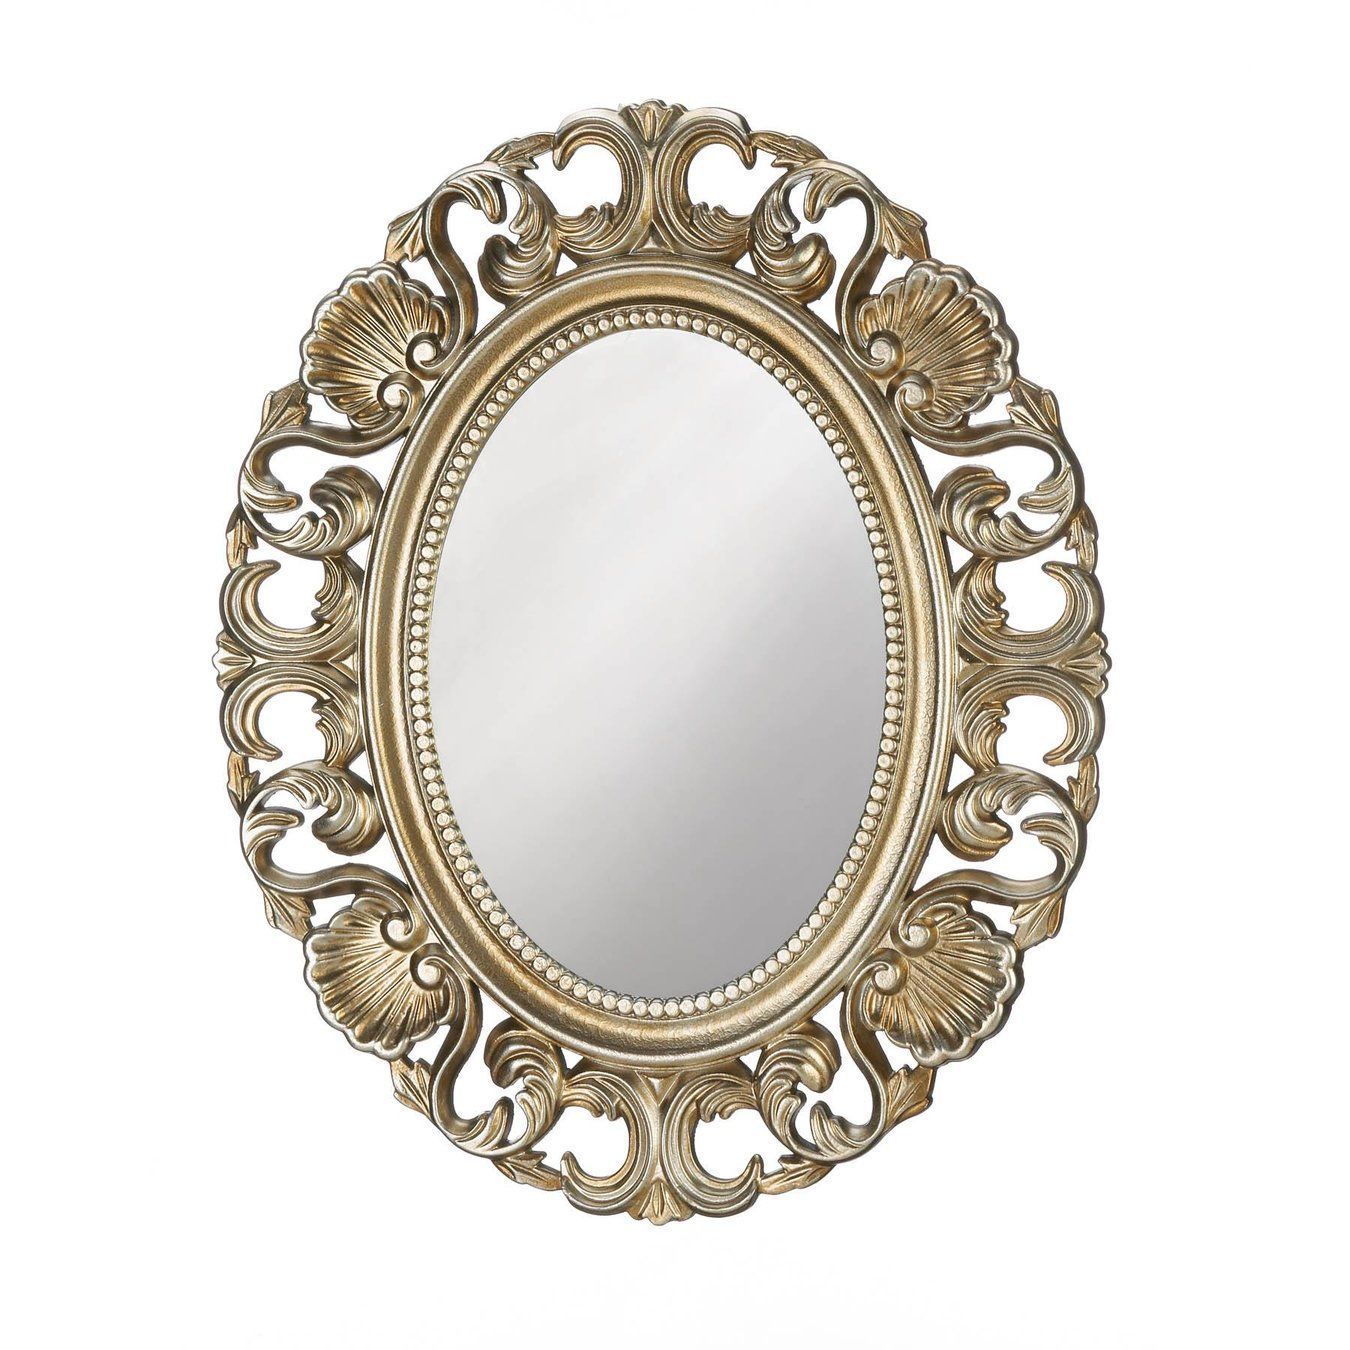 Golden Scallop Wall Mirror | Coristel Home Decor In 2021 | Mirror Wall Throughout Gold Scalloped Wall Mirrors (View 3 of 15)